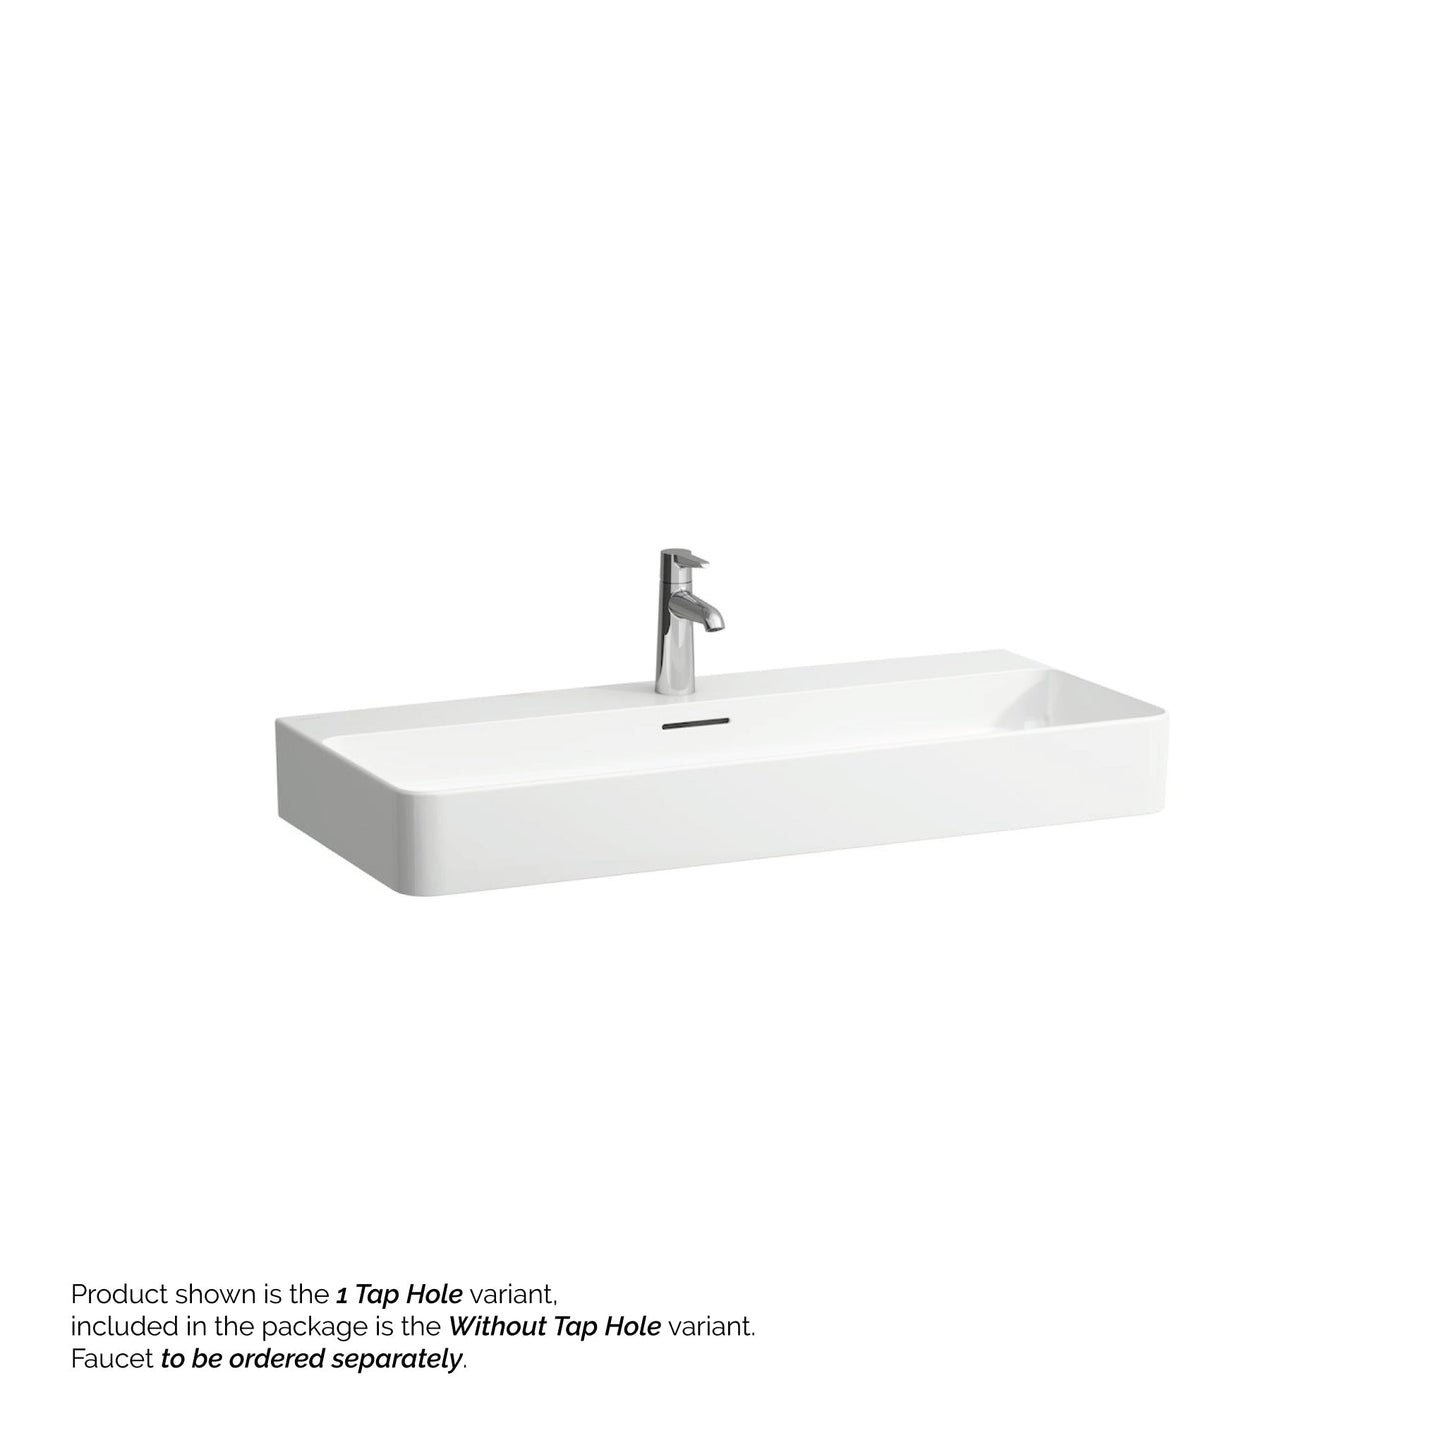 Laufen Val 37" x 17" White Ceramic Countertop Bathroom Sink Without Faucet Hole